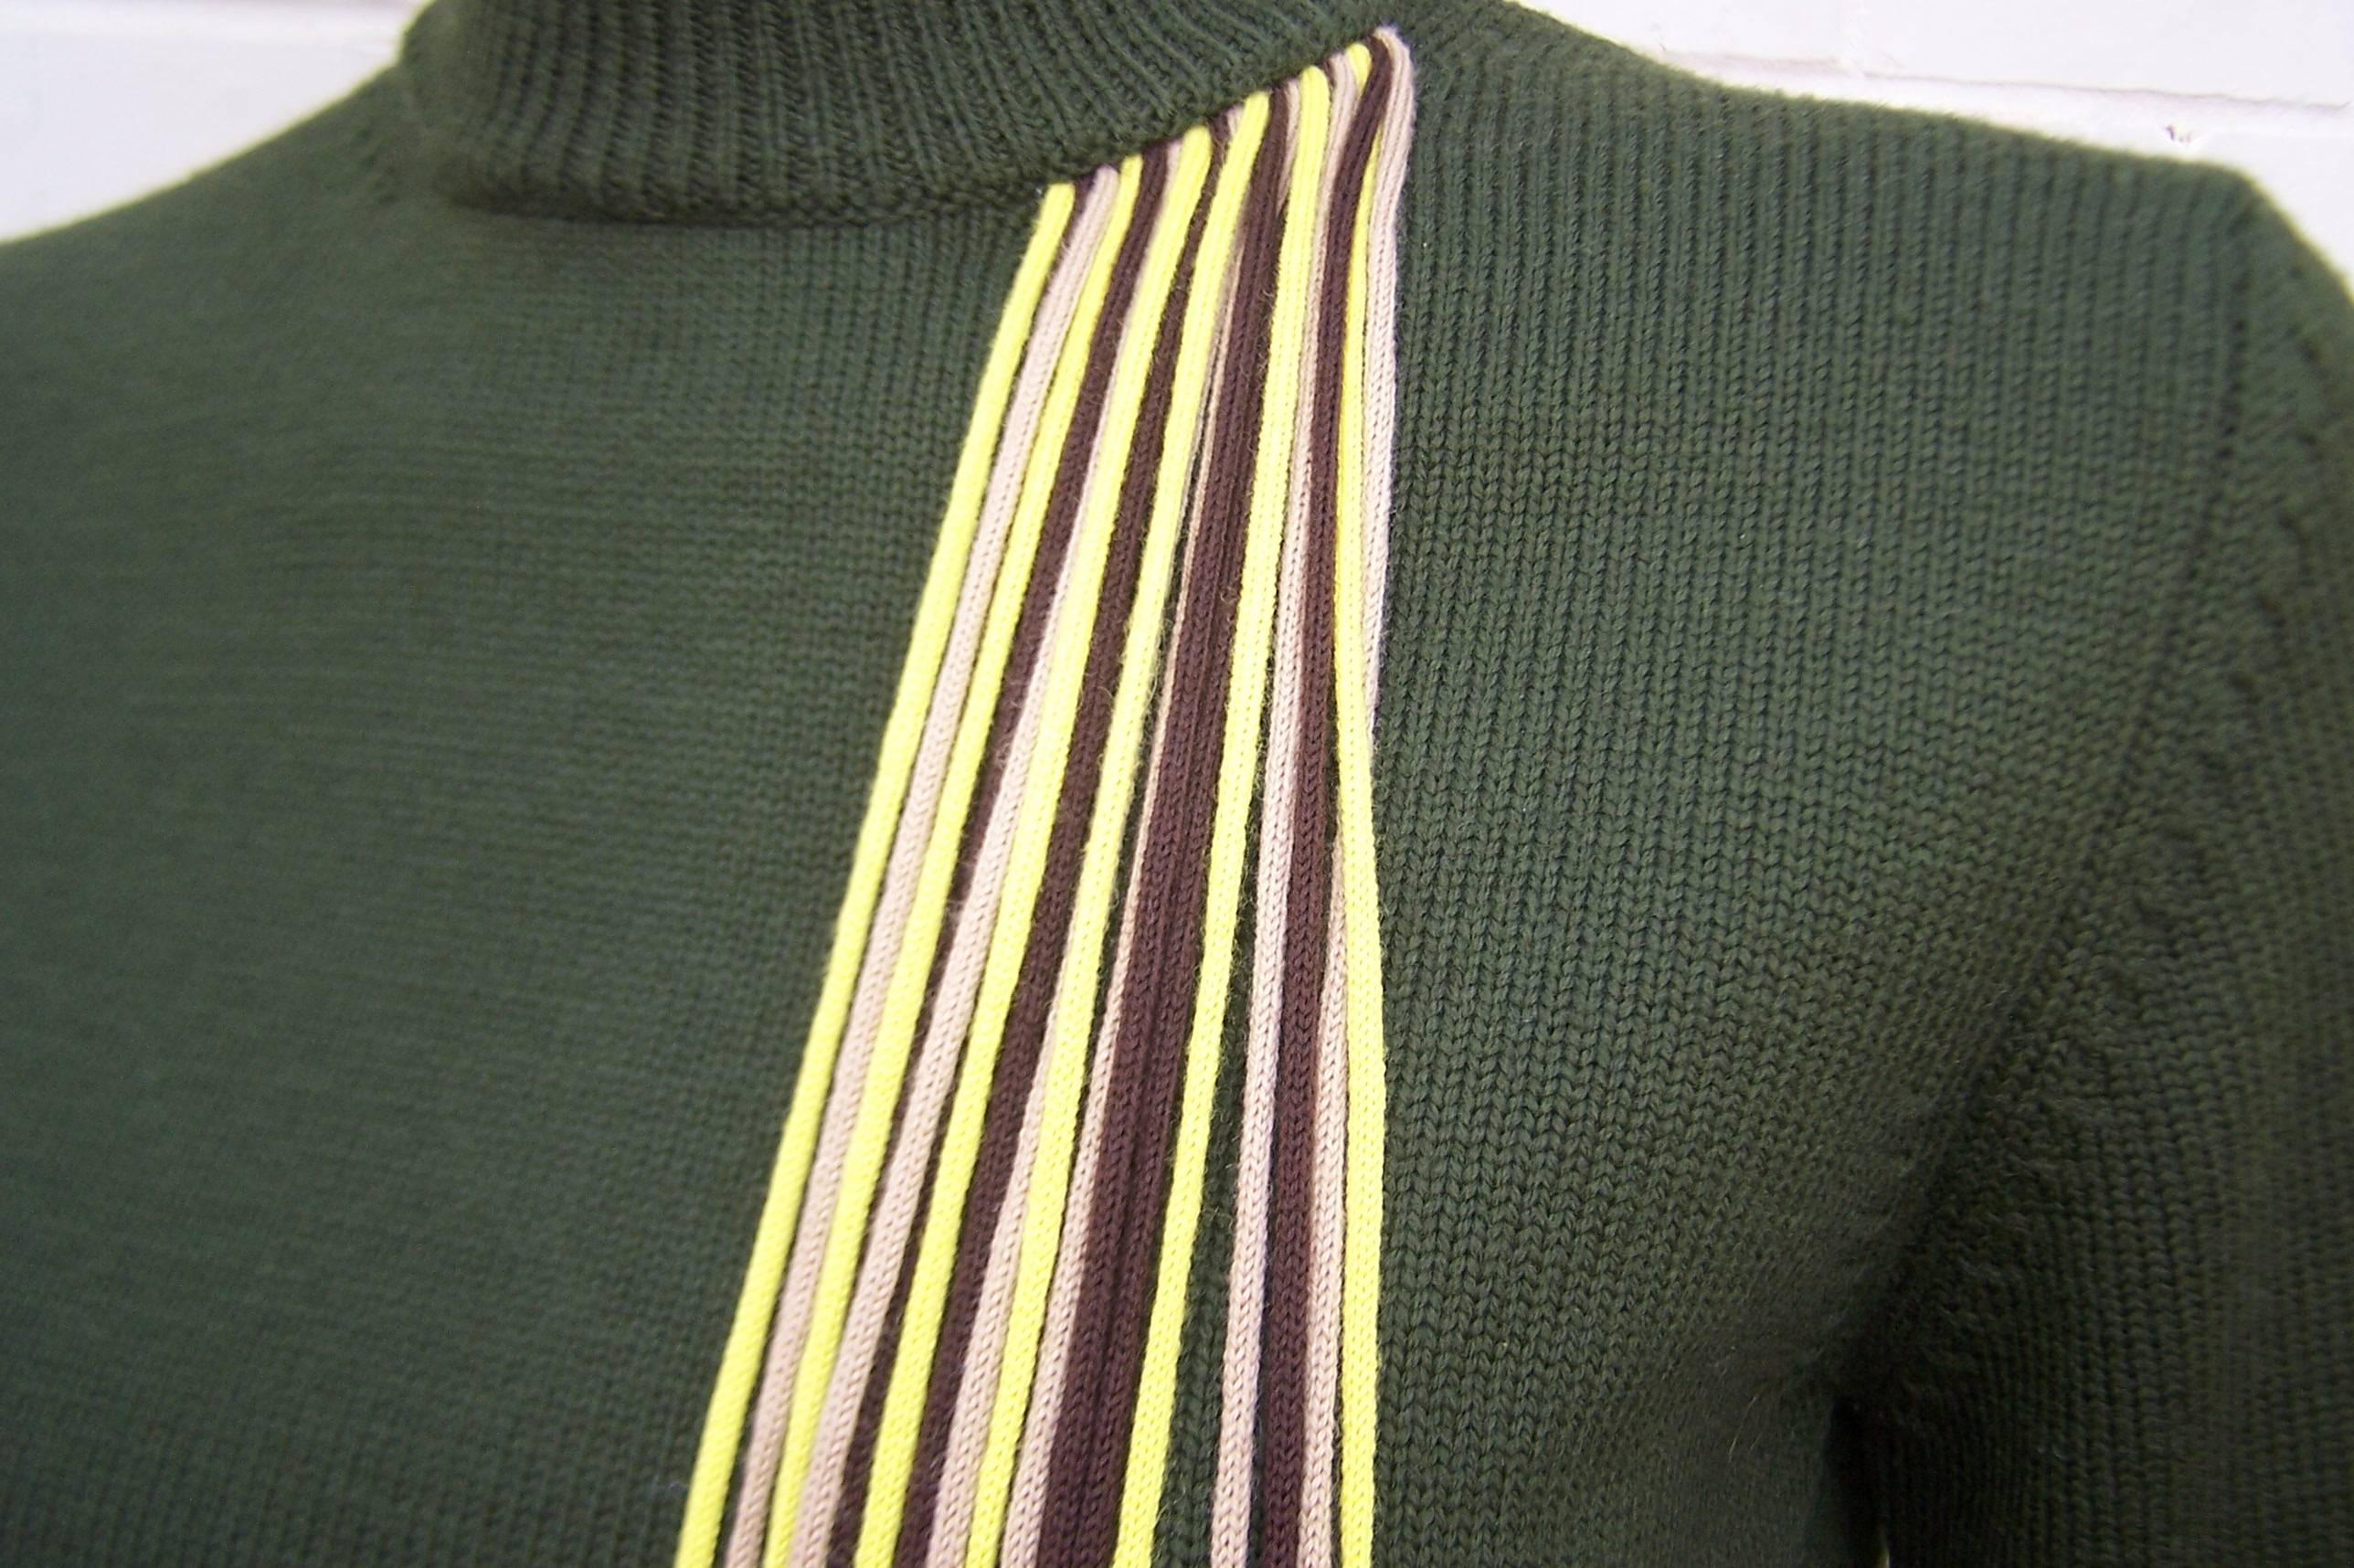 C.1990 Byblos Army Green Turtleneck Sweater With Op Art Yarn Details 4